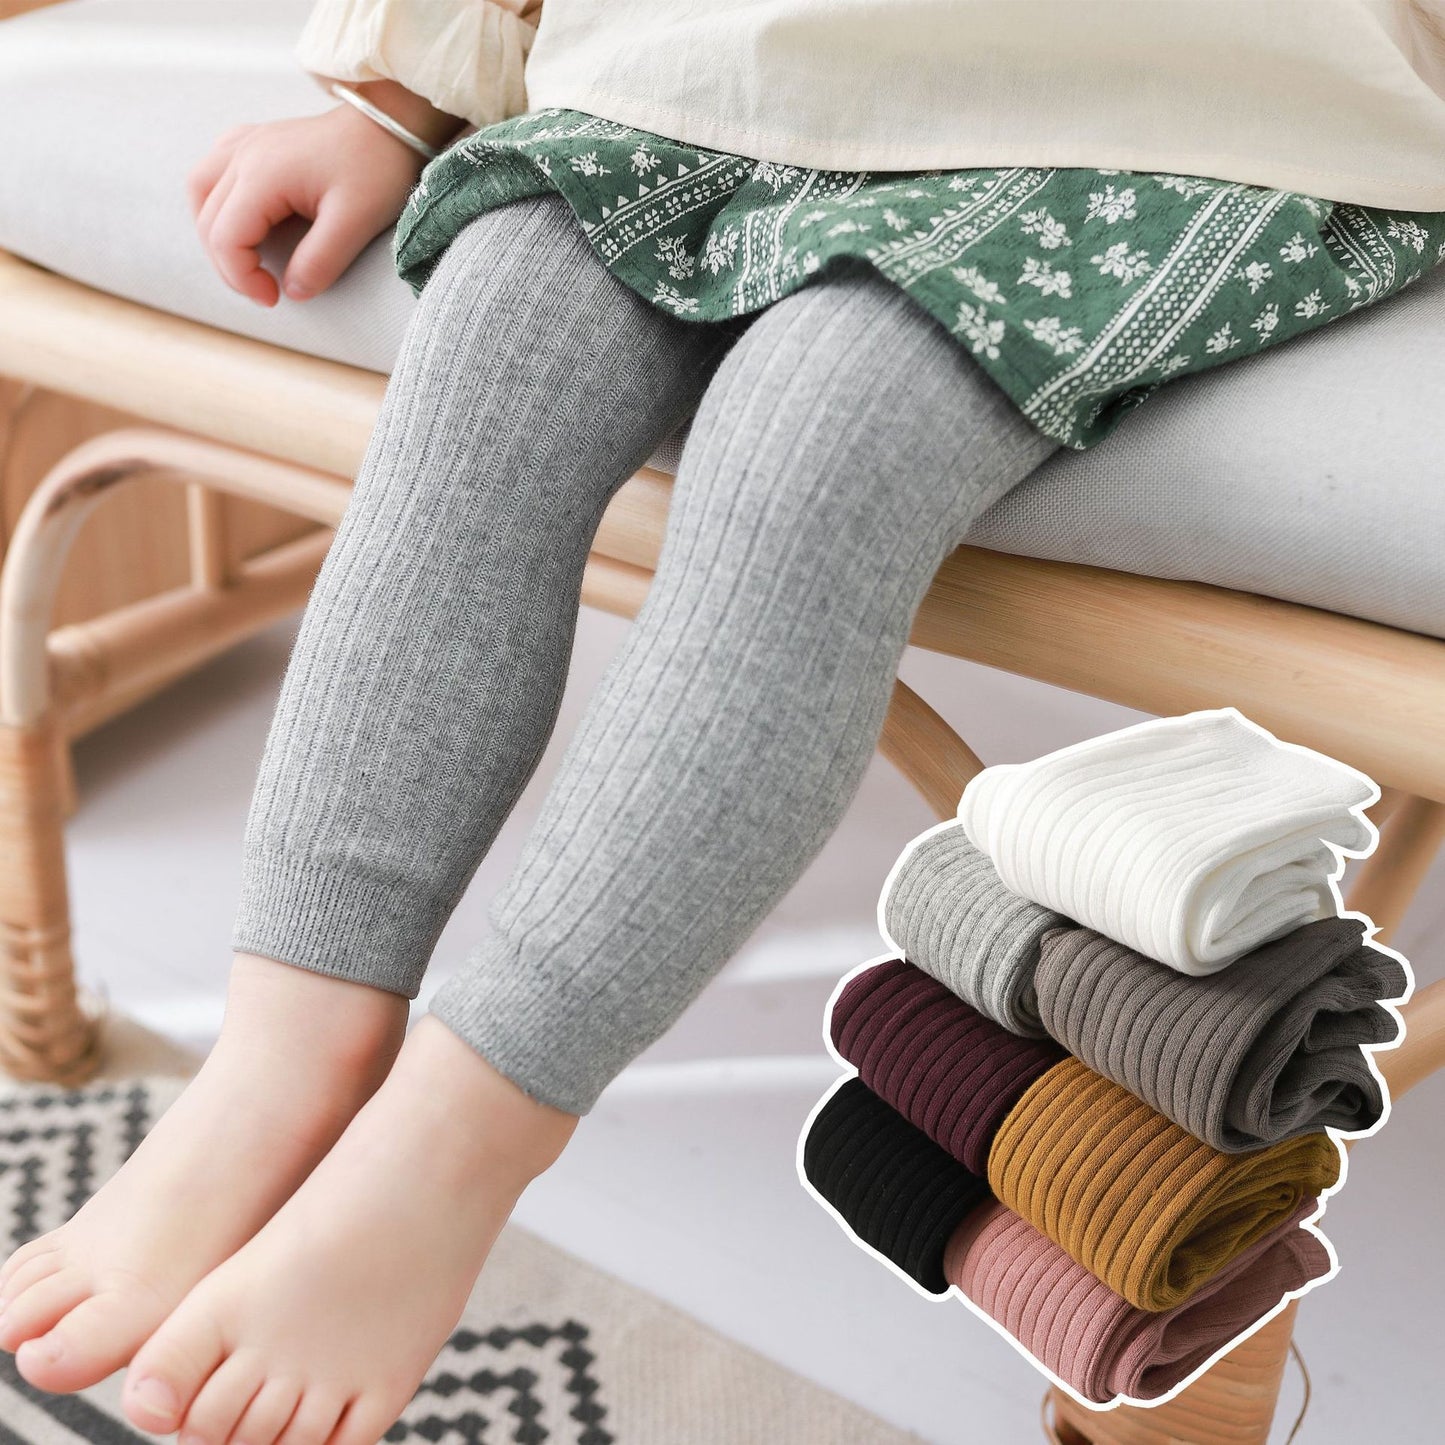 Kids Children Knitting Trousers For 0-6 Years - enoughdream.com